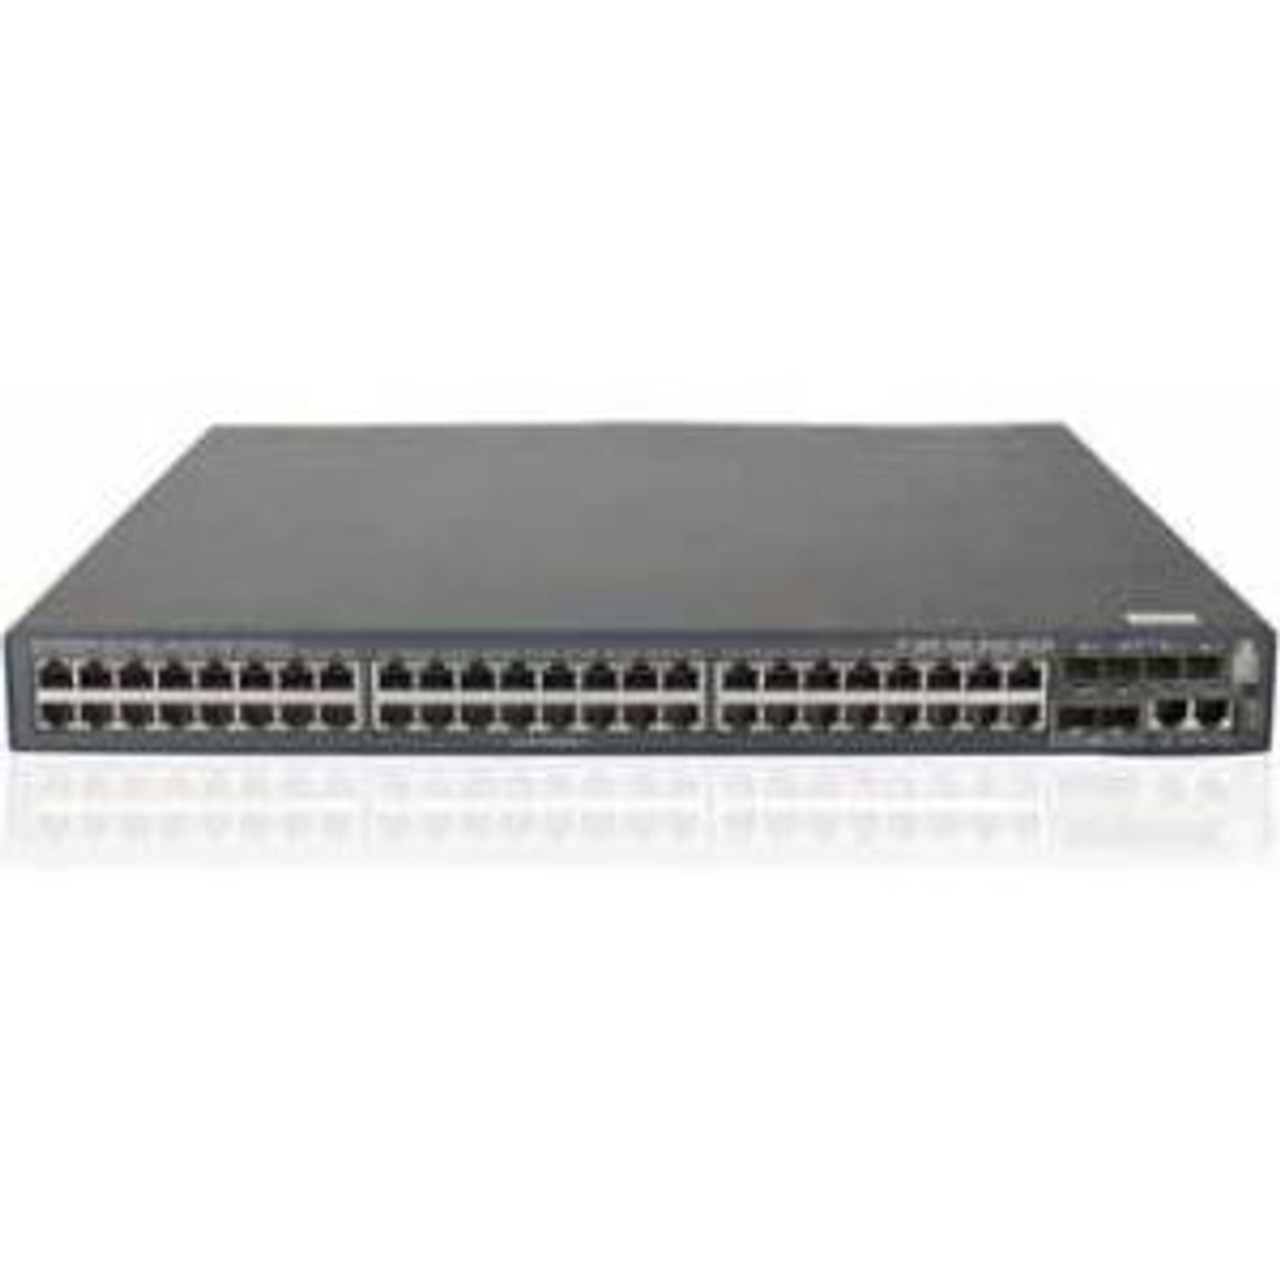 JG680A HP 5500-48G-PoE+-4SFP HI TAA-compliant Switch with 2 Interface Slots (Refurbished)